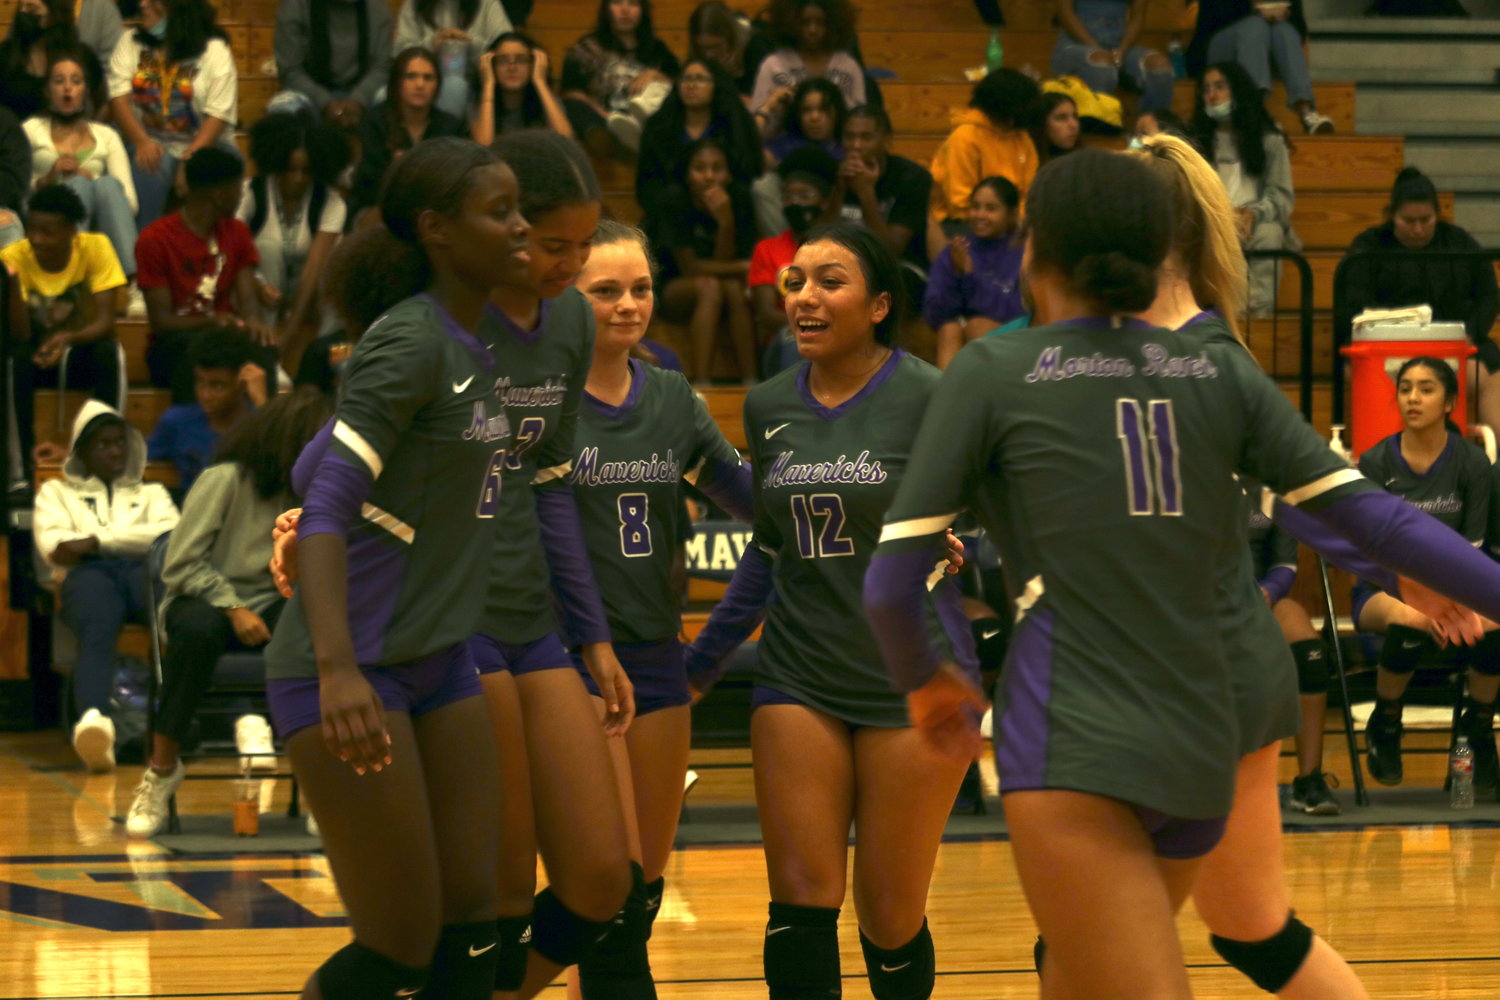 Morton Ranch celebrates a point during the teams sweep of Royal on Tuesday at the Morton Ranch gym.